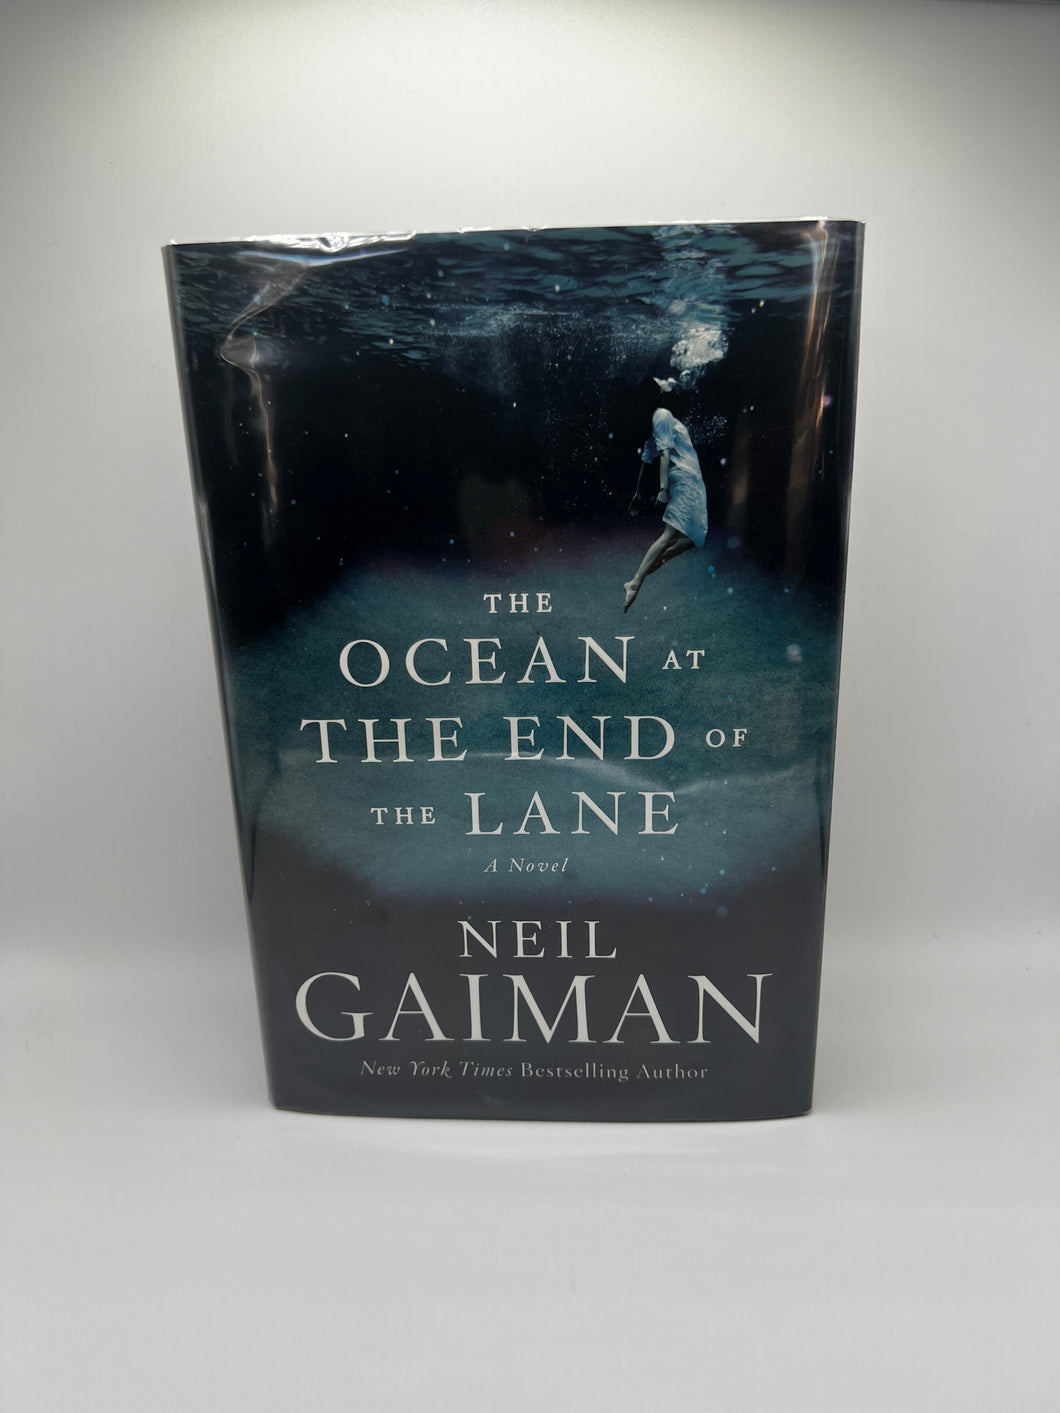 The Ocean At The End Of The Lane by Neil Gaiman (1st edition)